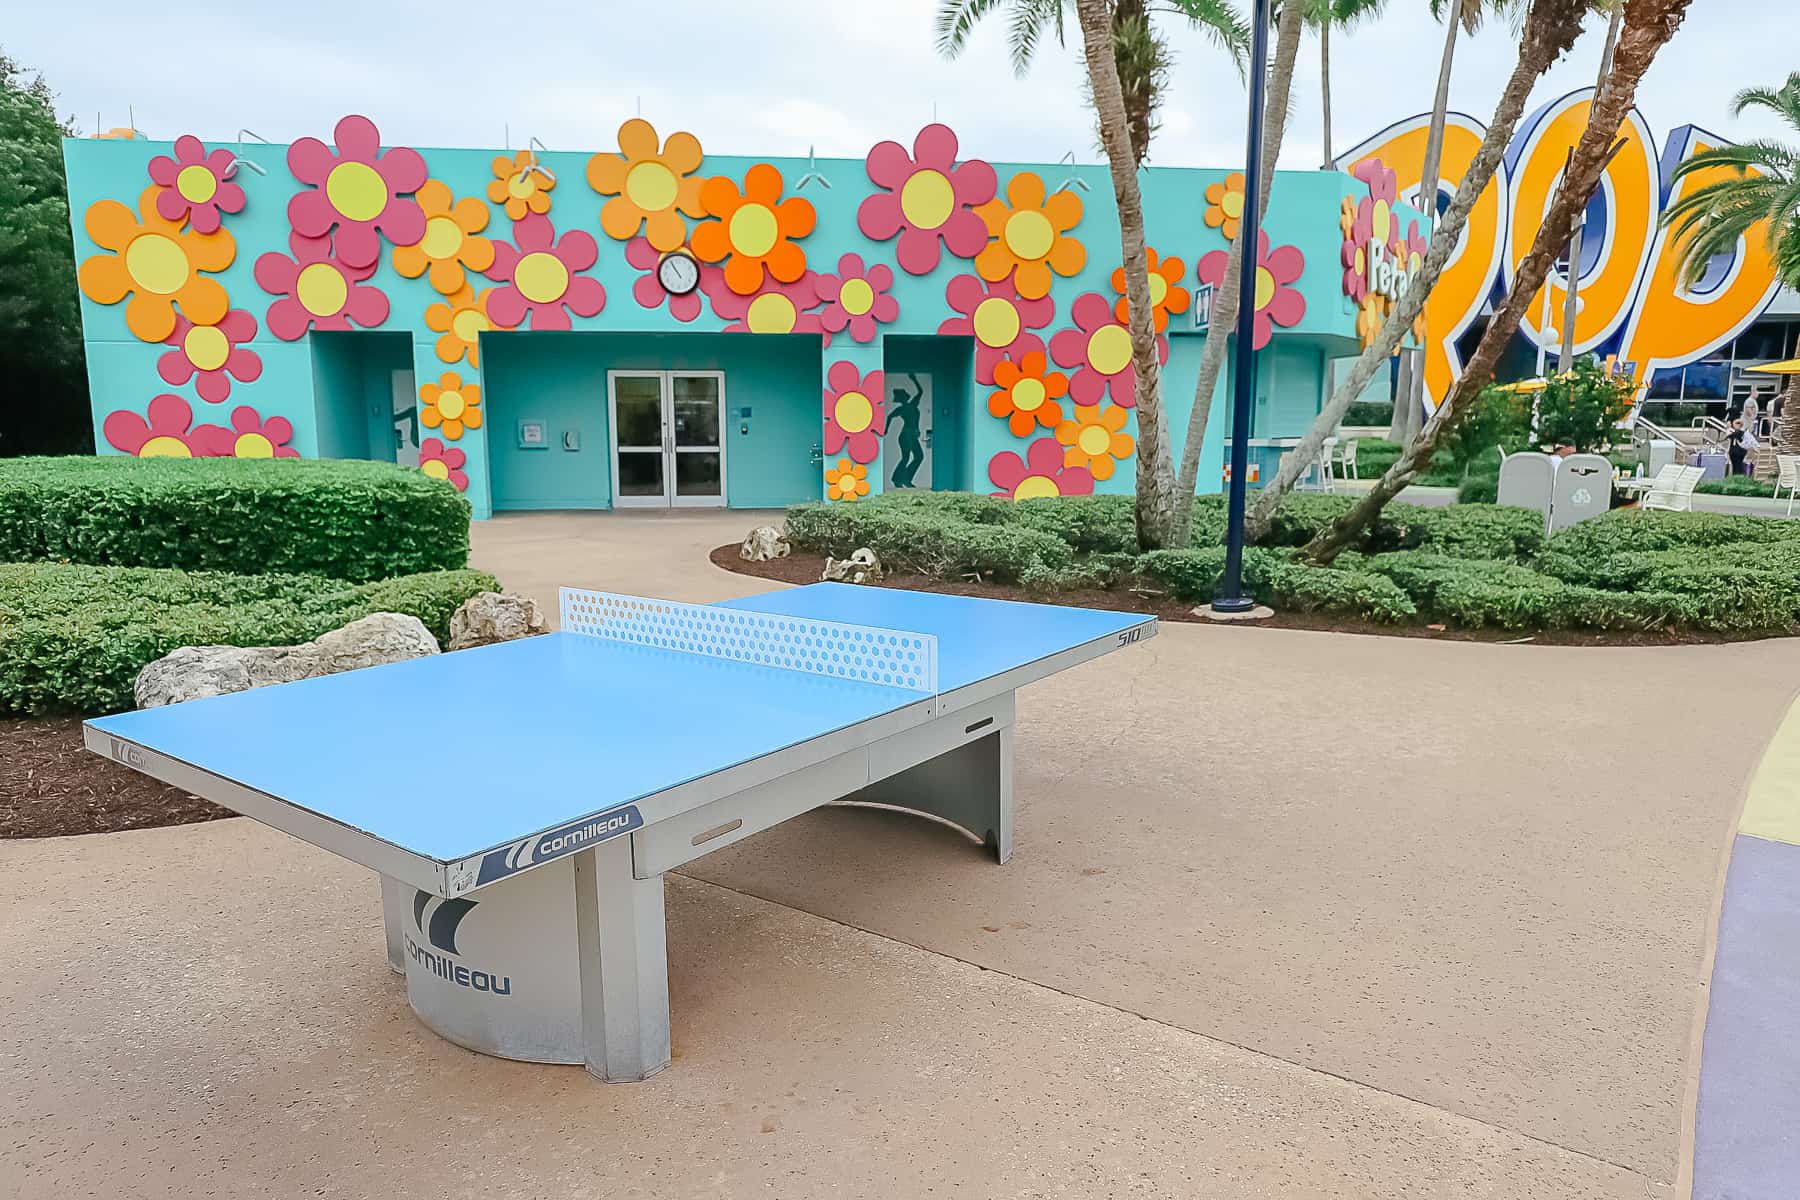 ping pong table games near the feature pool at Pop Century 